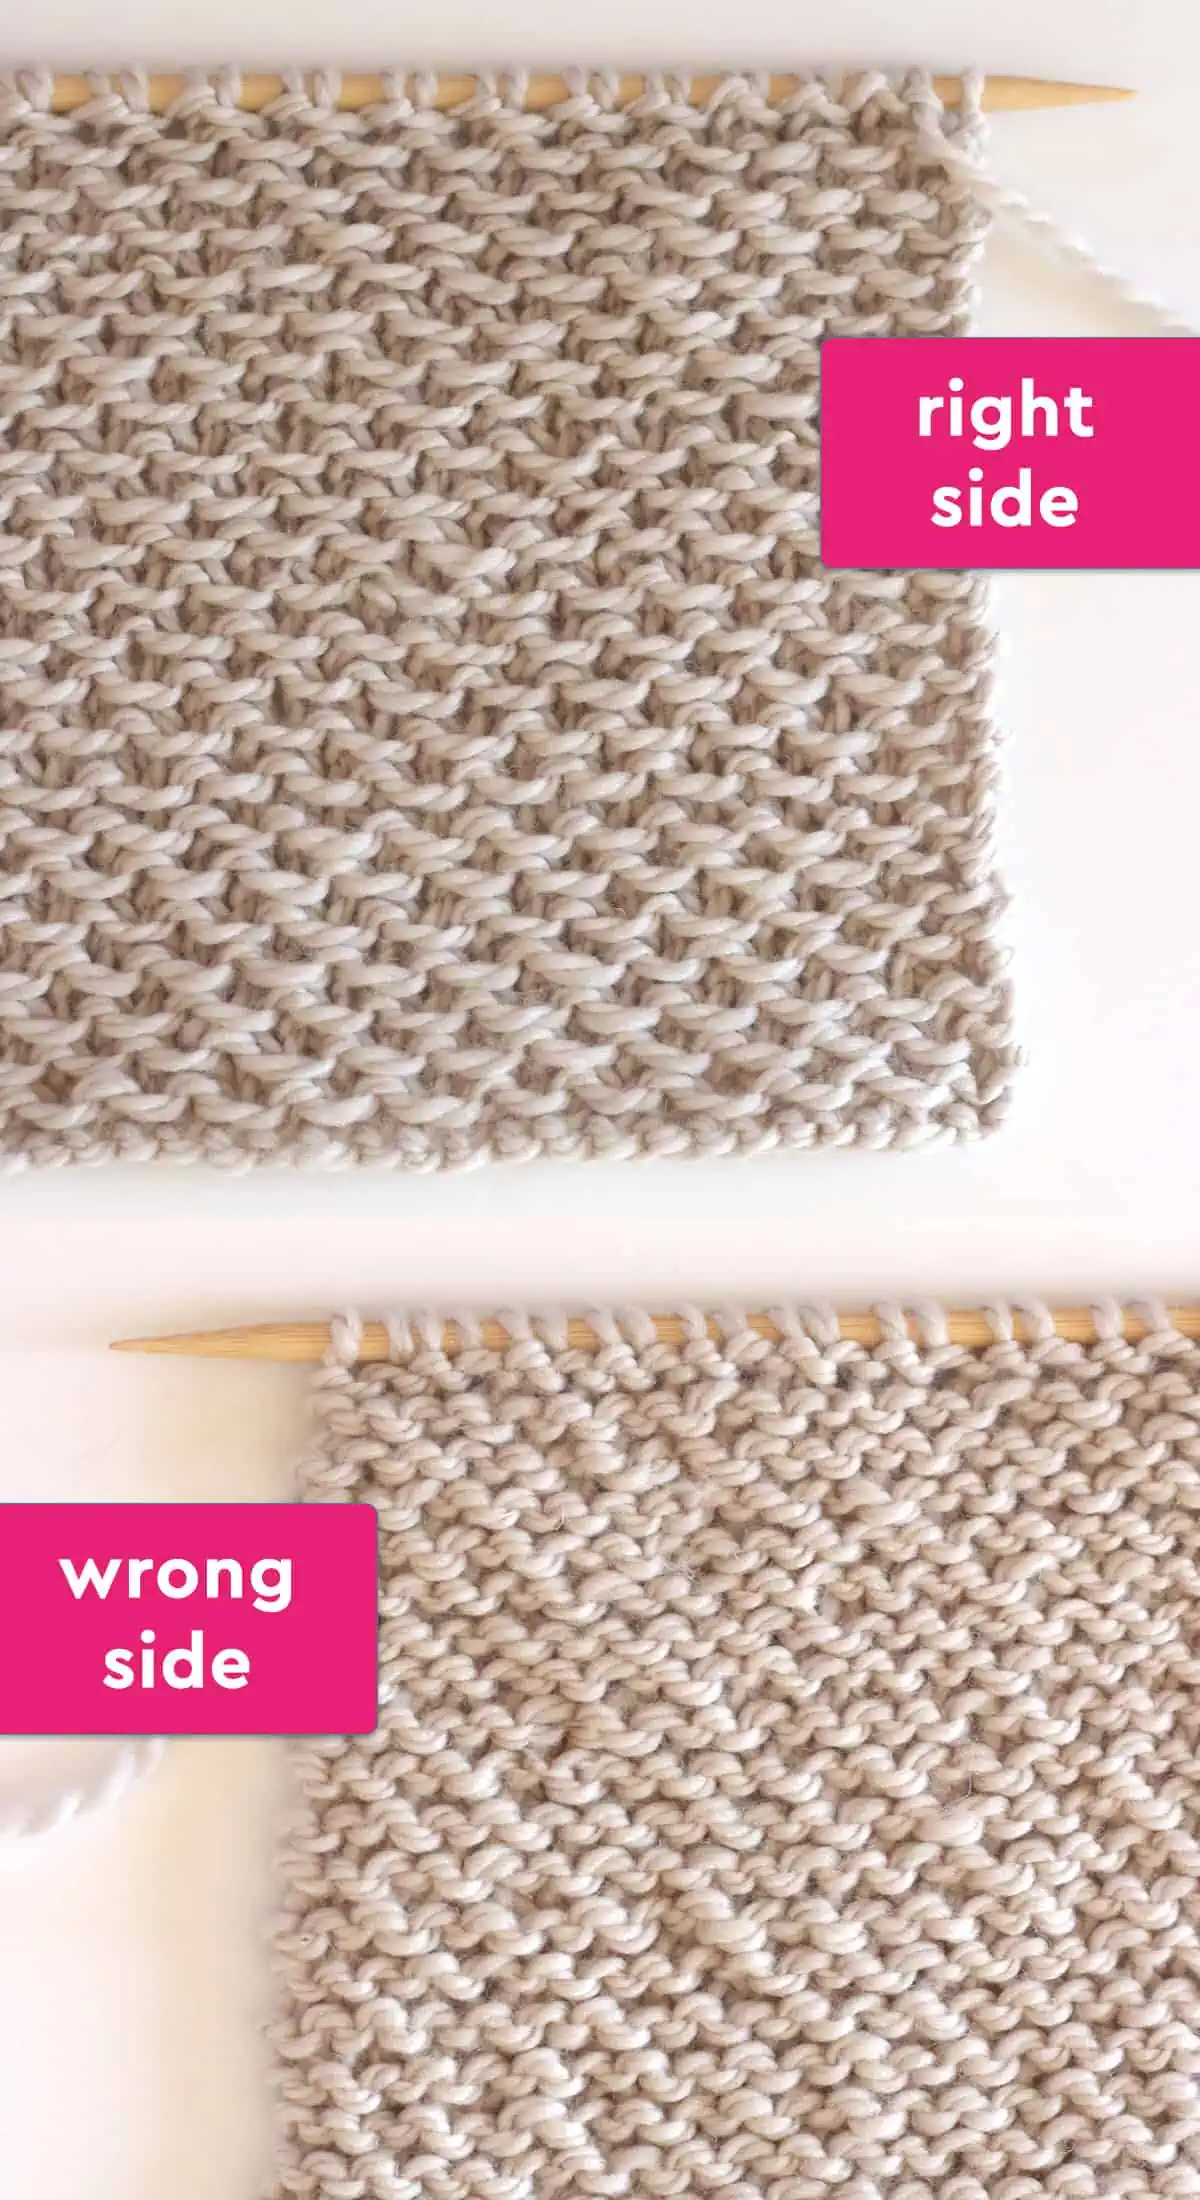 Right and Wrong sides of the Stamen Stitch knitted with beige colored yarn.